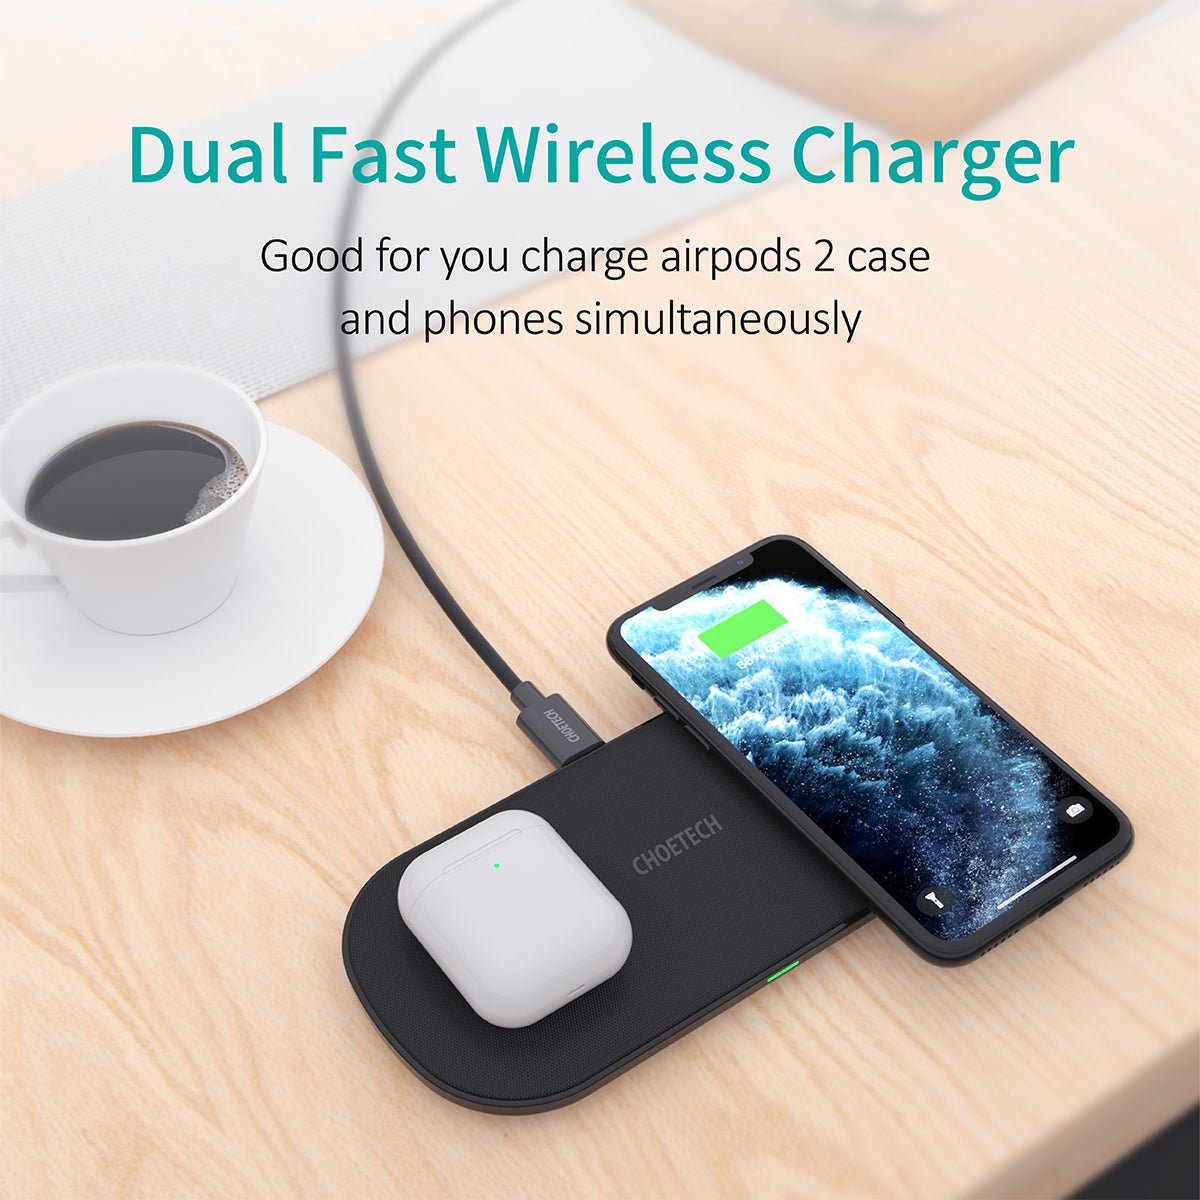 Choetech Dual Wireless Charger - T535-S - Level UpLevel UpAdapter6971824975253